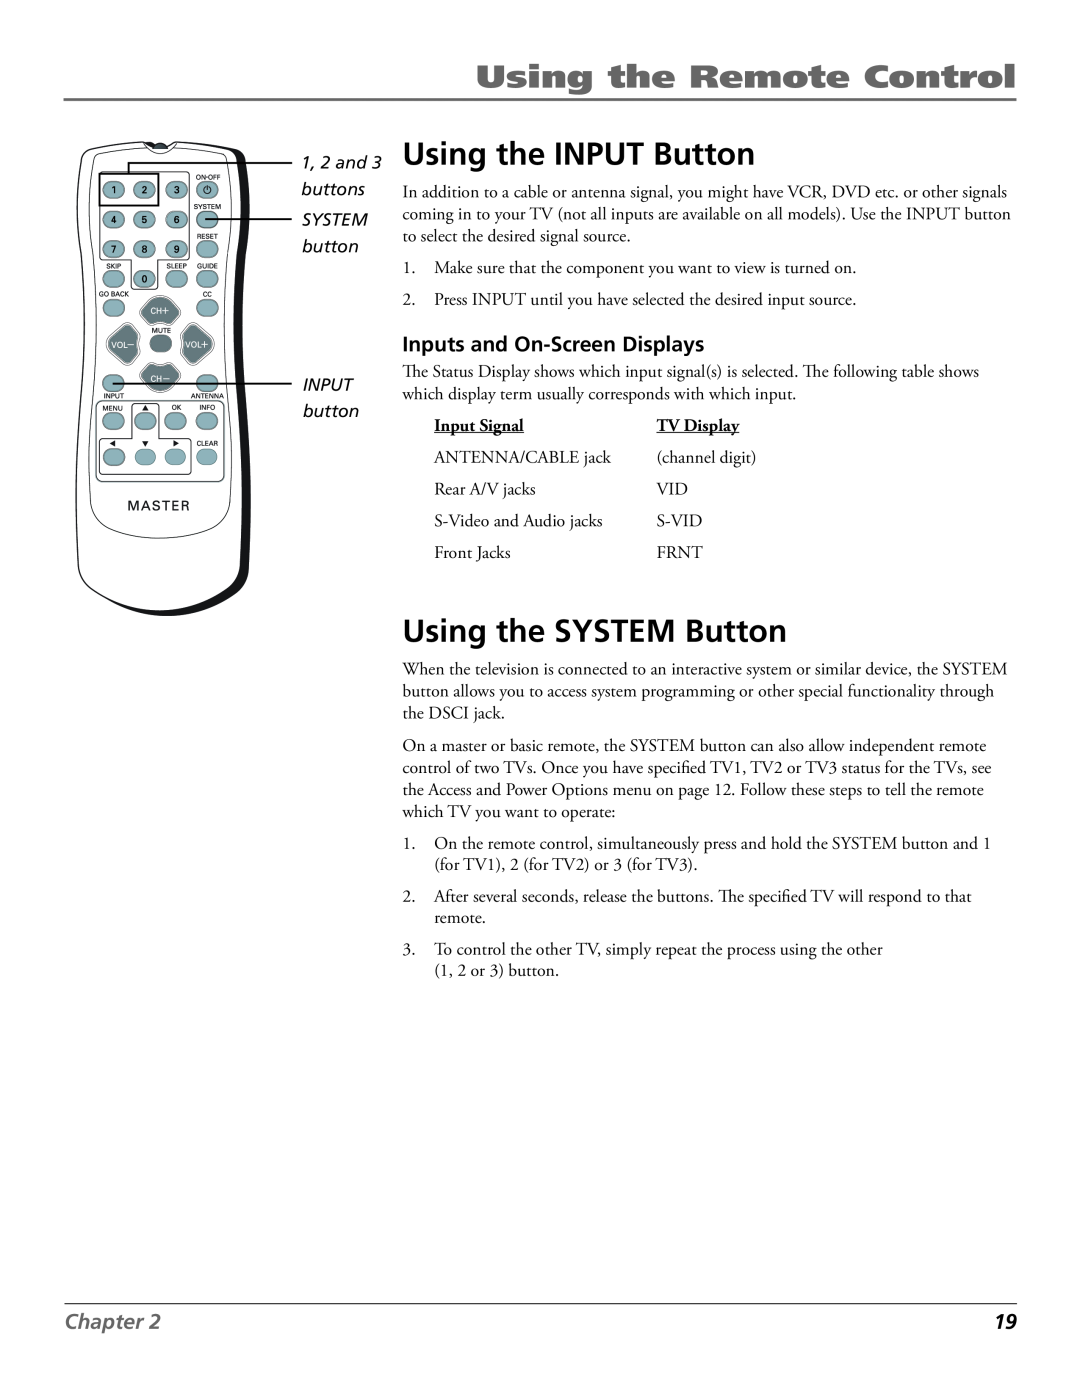 RCA J27F636 manual Using the INPUT Button, Using the SYSTEM Button, Inputs and On-Screen Displays, Using the Remote Control 